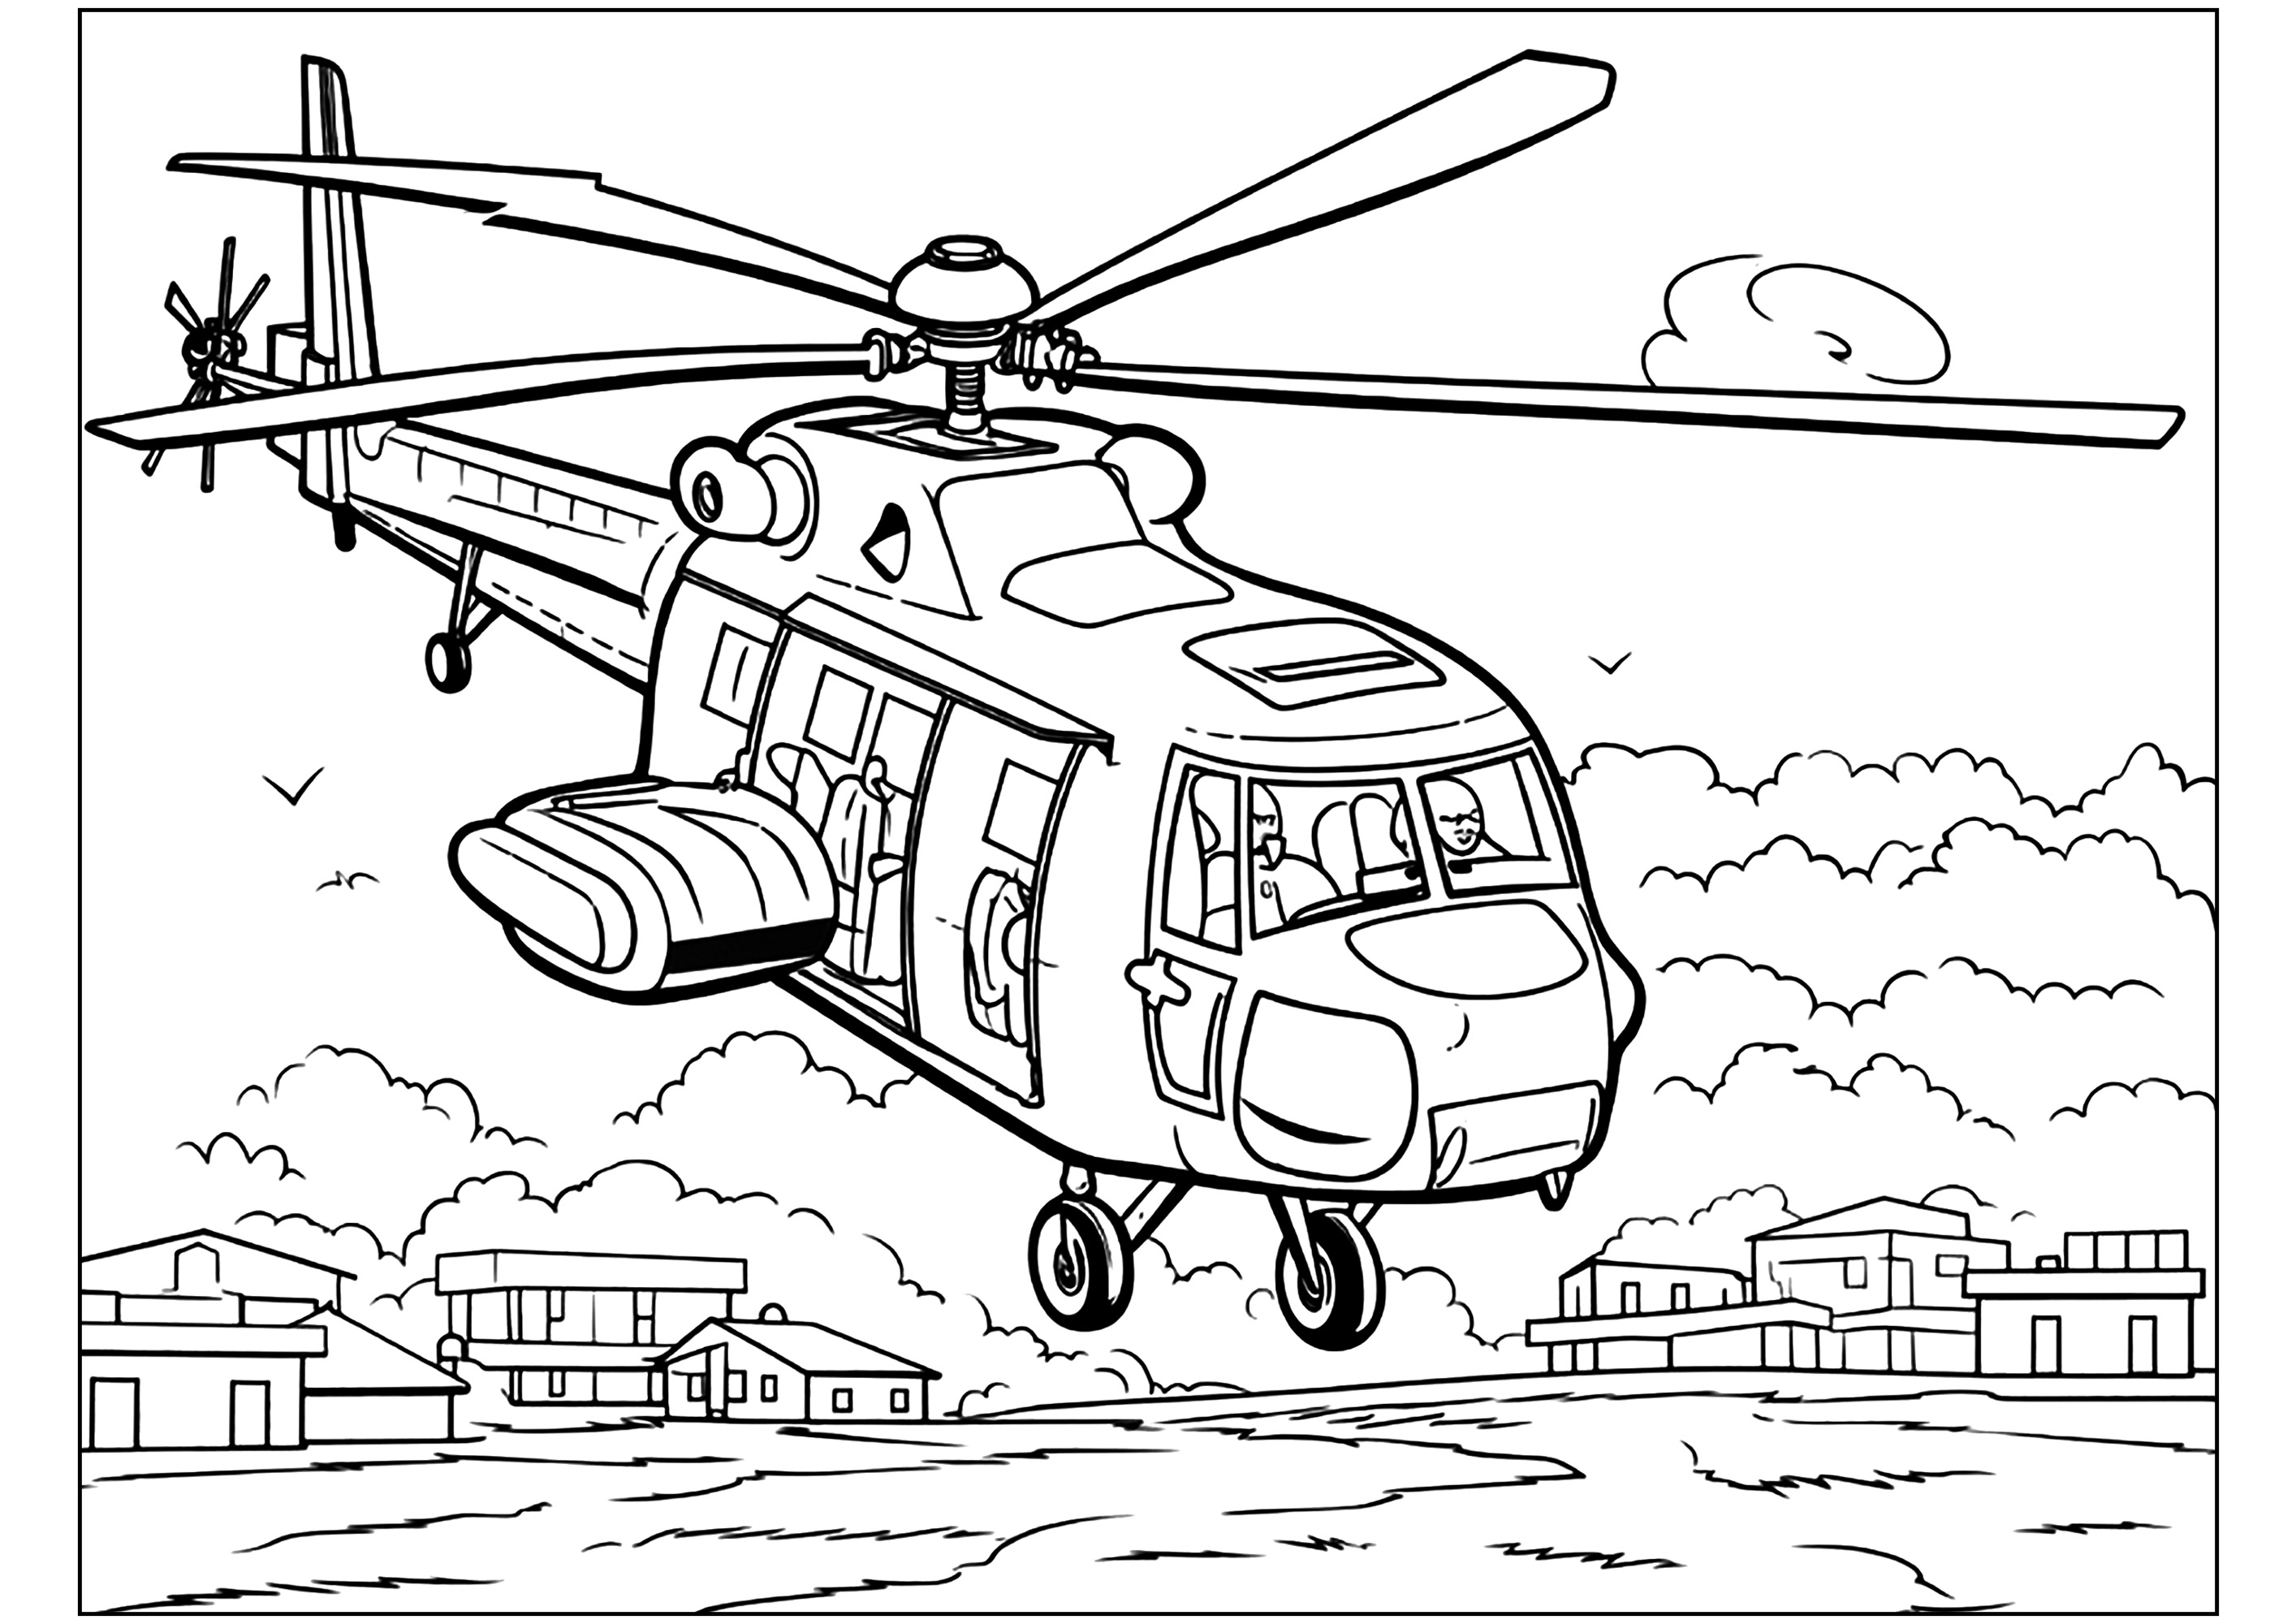 Military helicopter landing